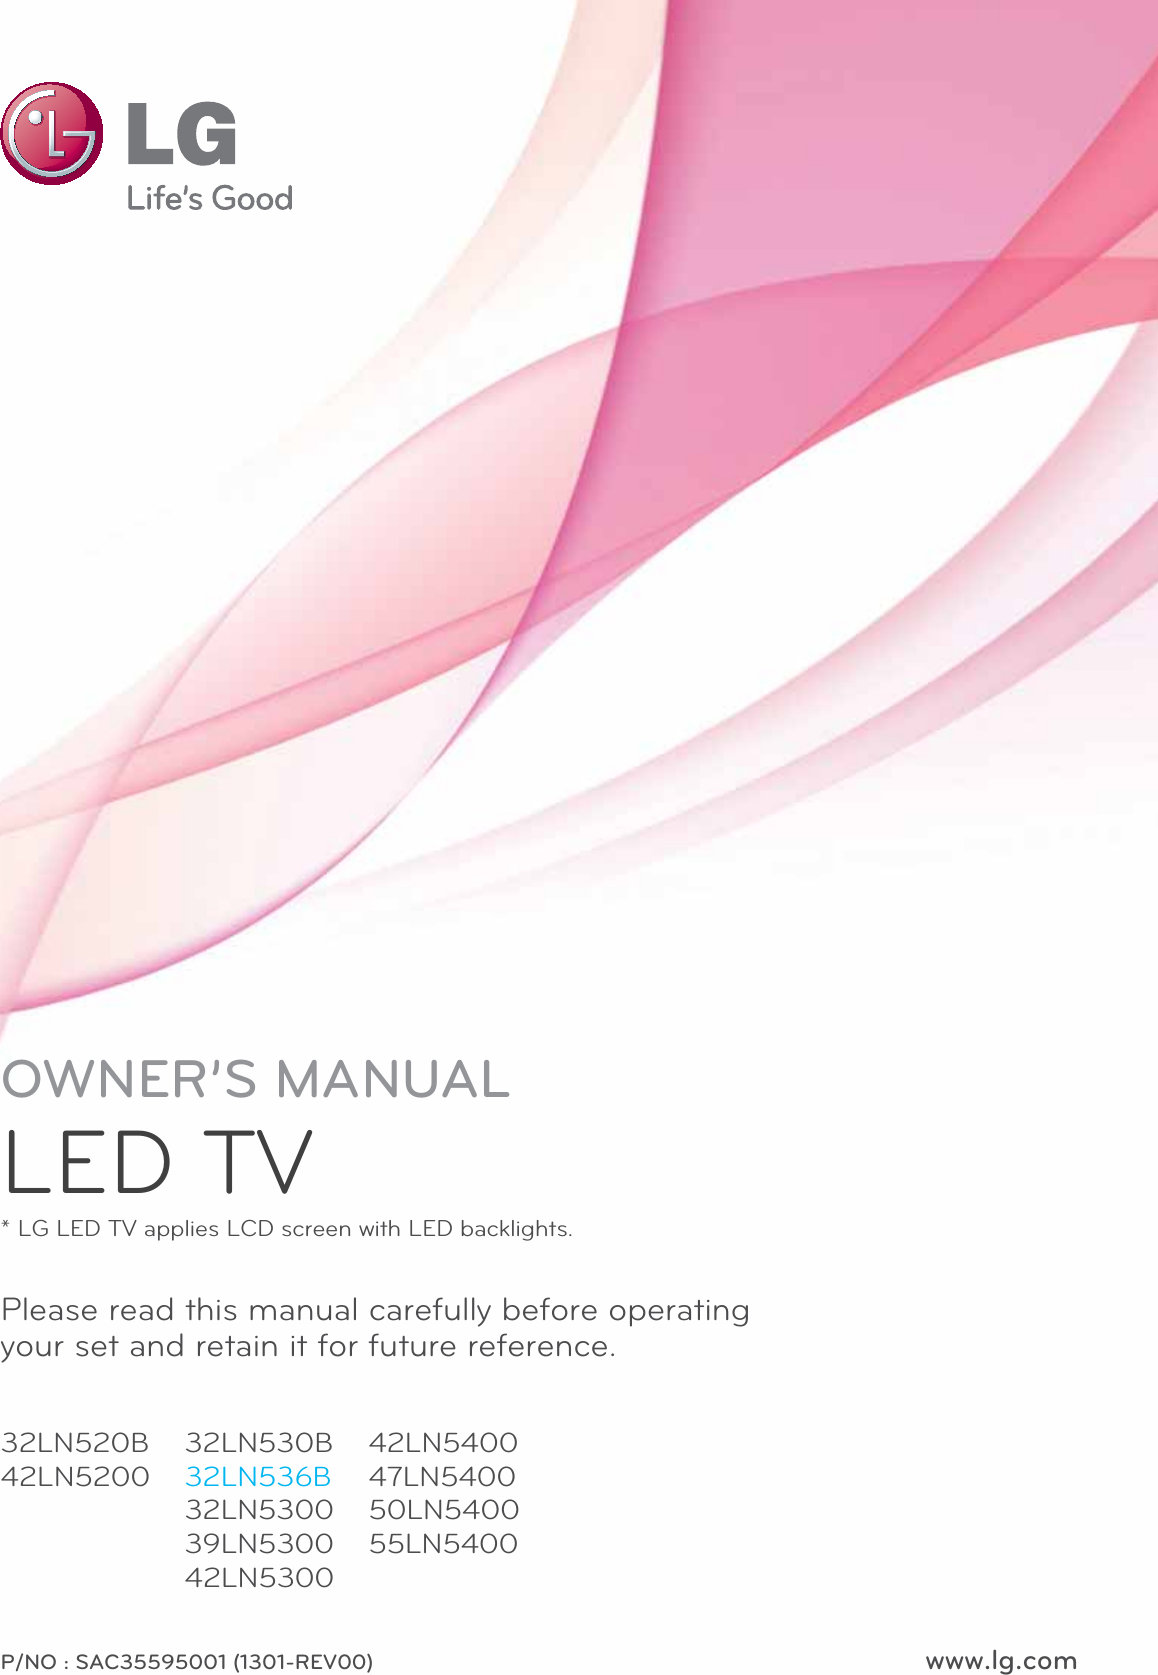 www.lg.comP/NO : SAC35595001 (1301-REV00)Please read this manual carefully before operating your set and retain it for future reference.OWNER’S MANUALLED TV* LG LED TV applies LCD screen with LED backlights.32LN520B 42LN520032LN530B 32LN536B32LN5300 39LN5300 42LN530042LN5400 47LN5400 50LN5400 55LN5400